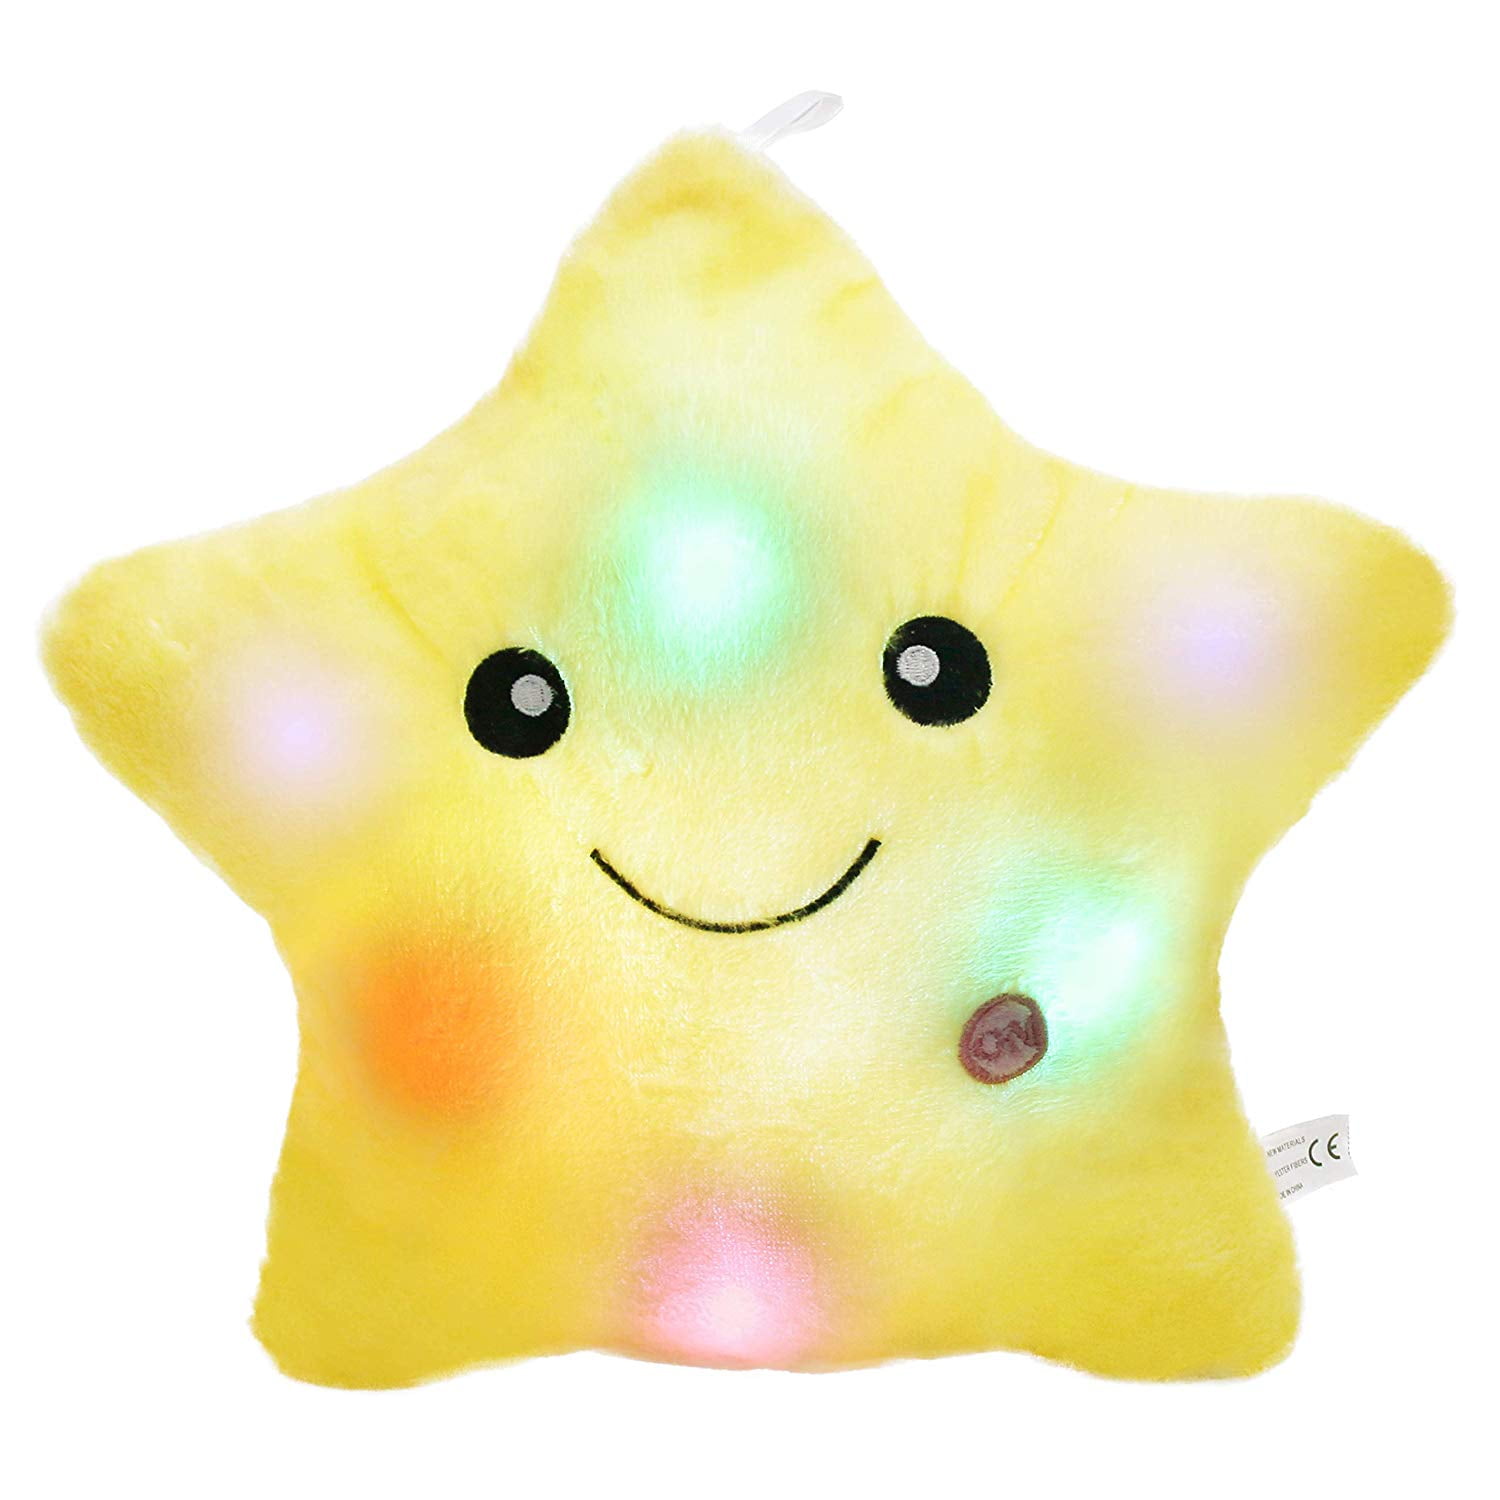 Creative Twinkle Glowing Stars Shape Plush Throw Pillow, LED Night Light  Pillow Cushions Stuffed Toys Gifts for Kids, Christmas (Yellow)